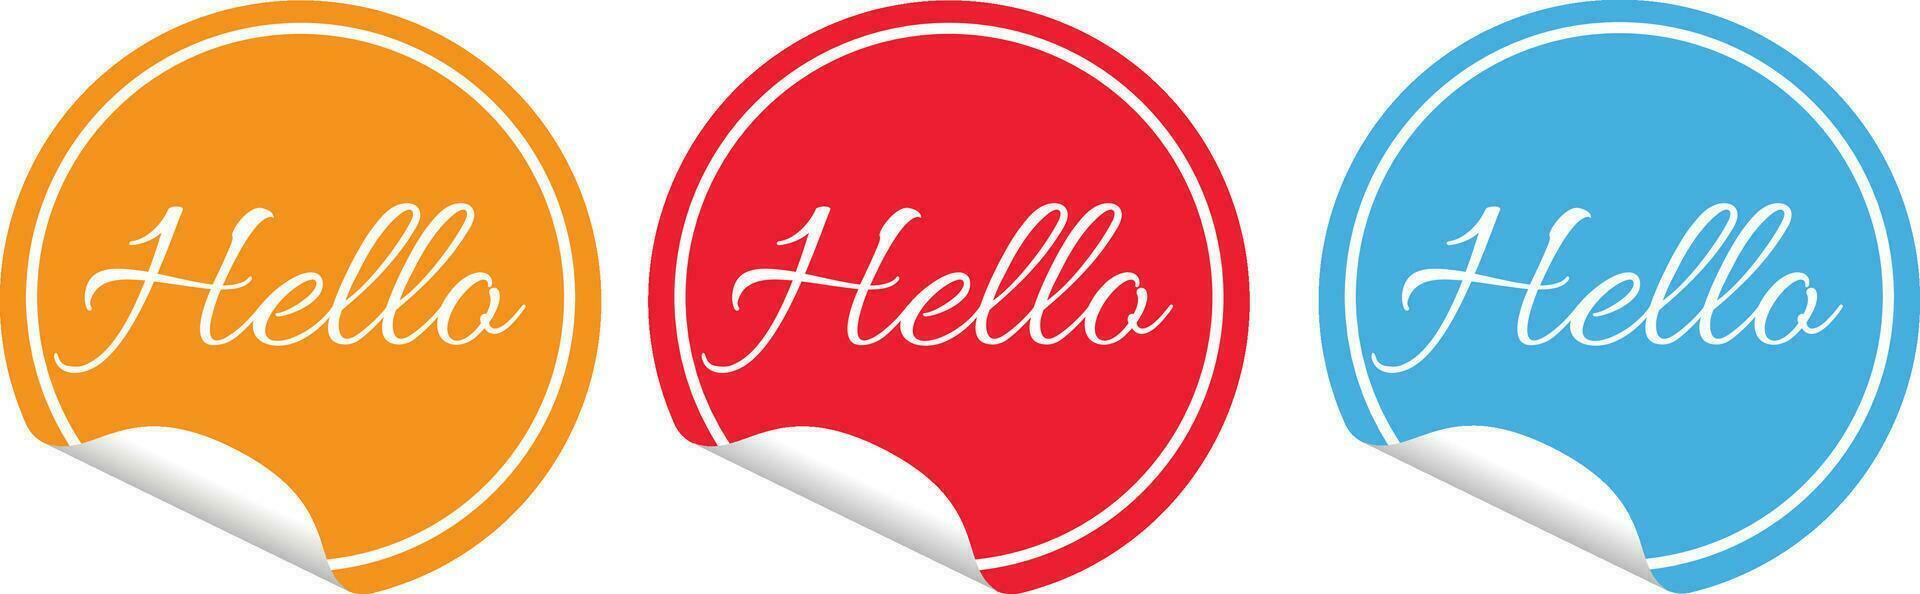 Hello circle sticker Vector set of round adhesive stickers with folded edges